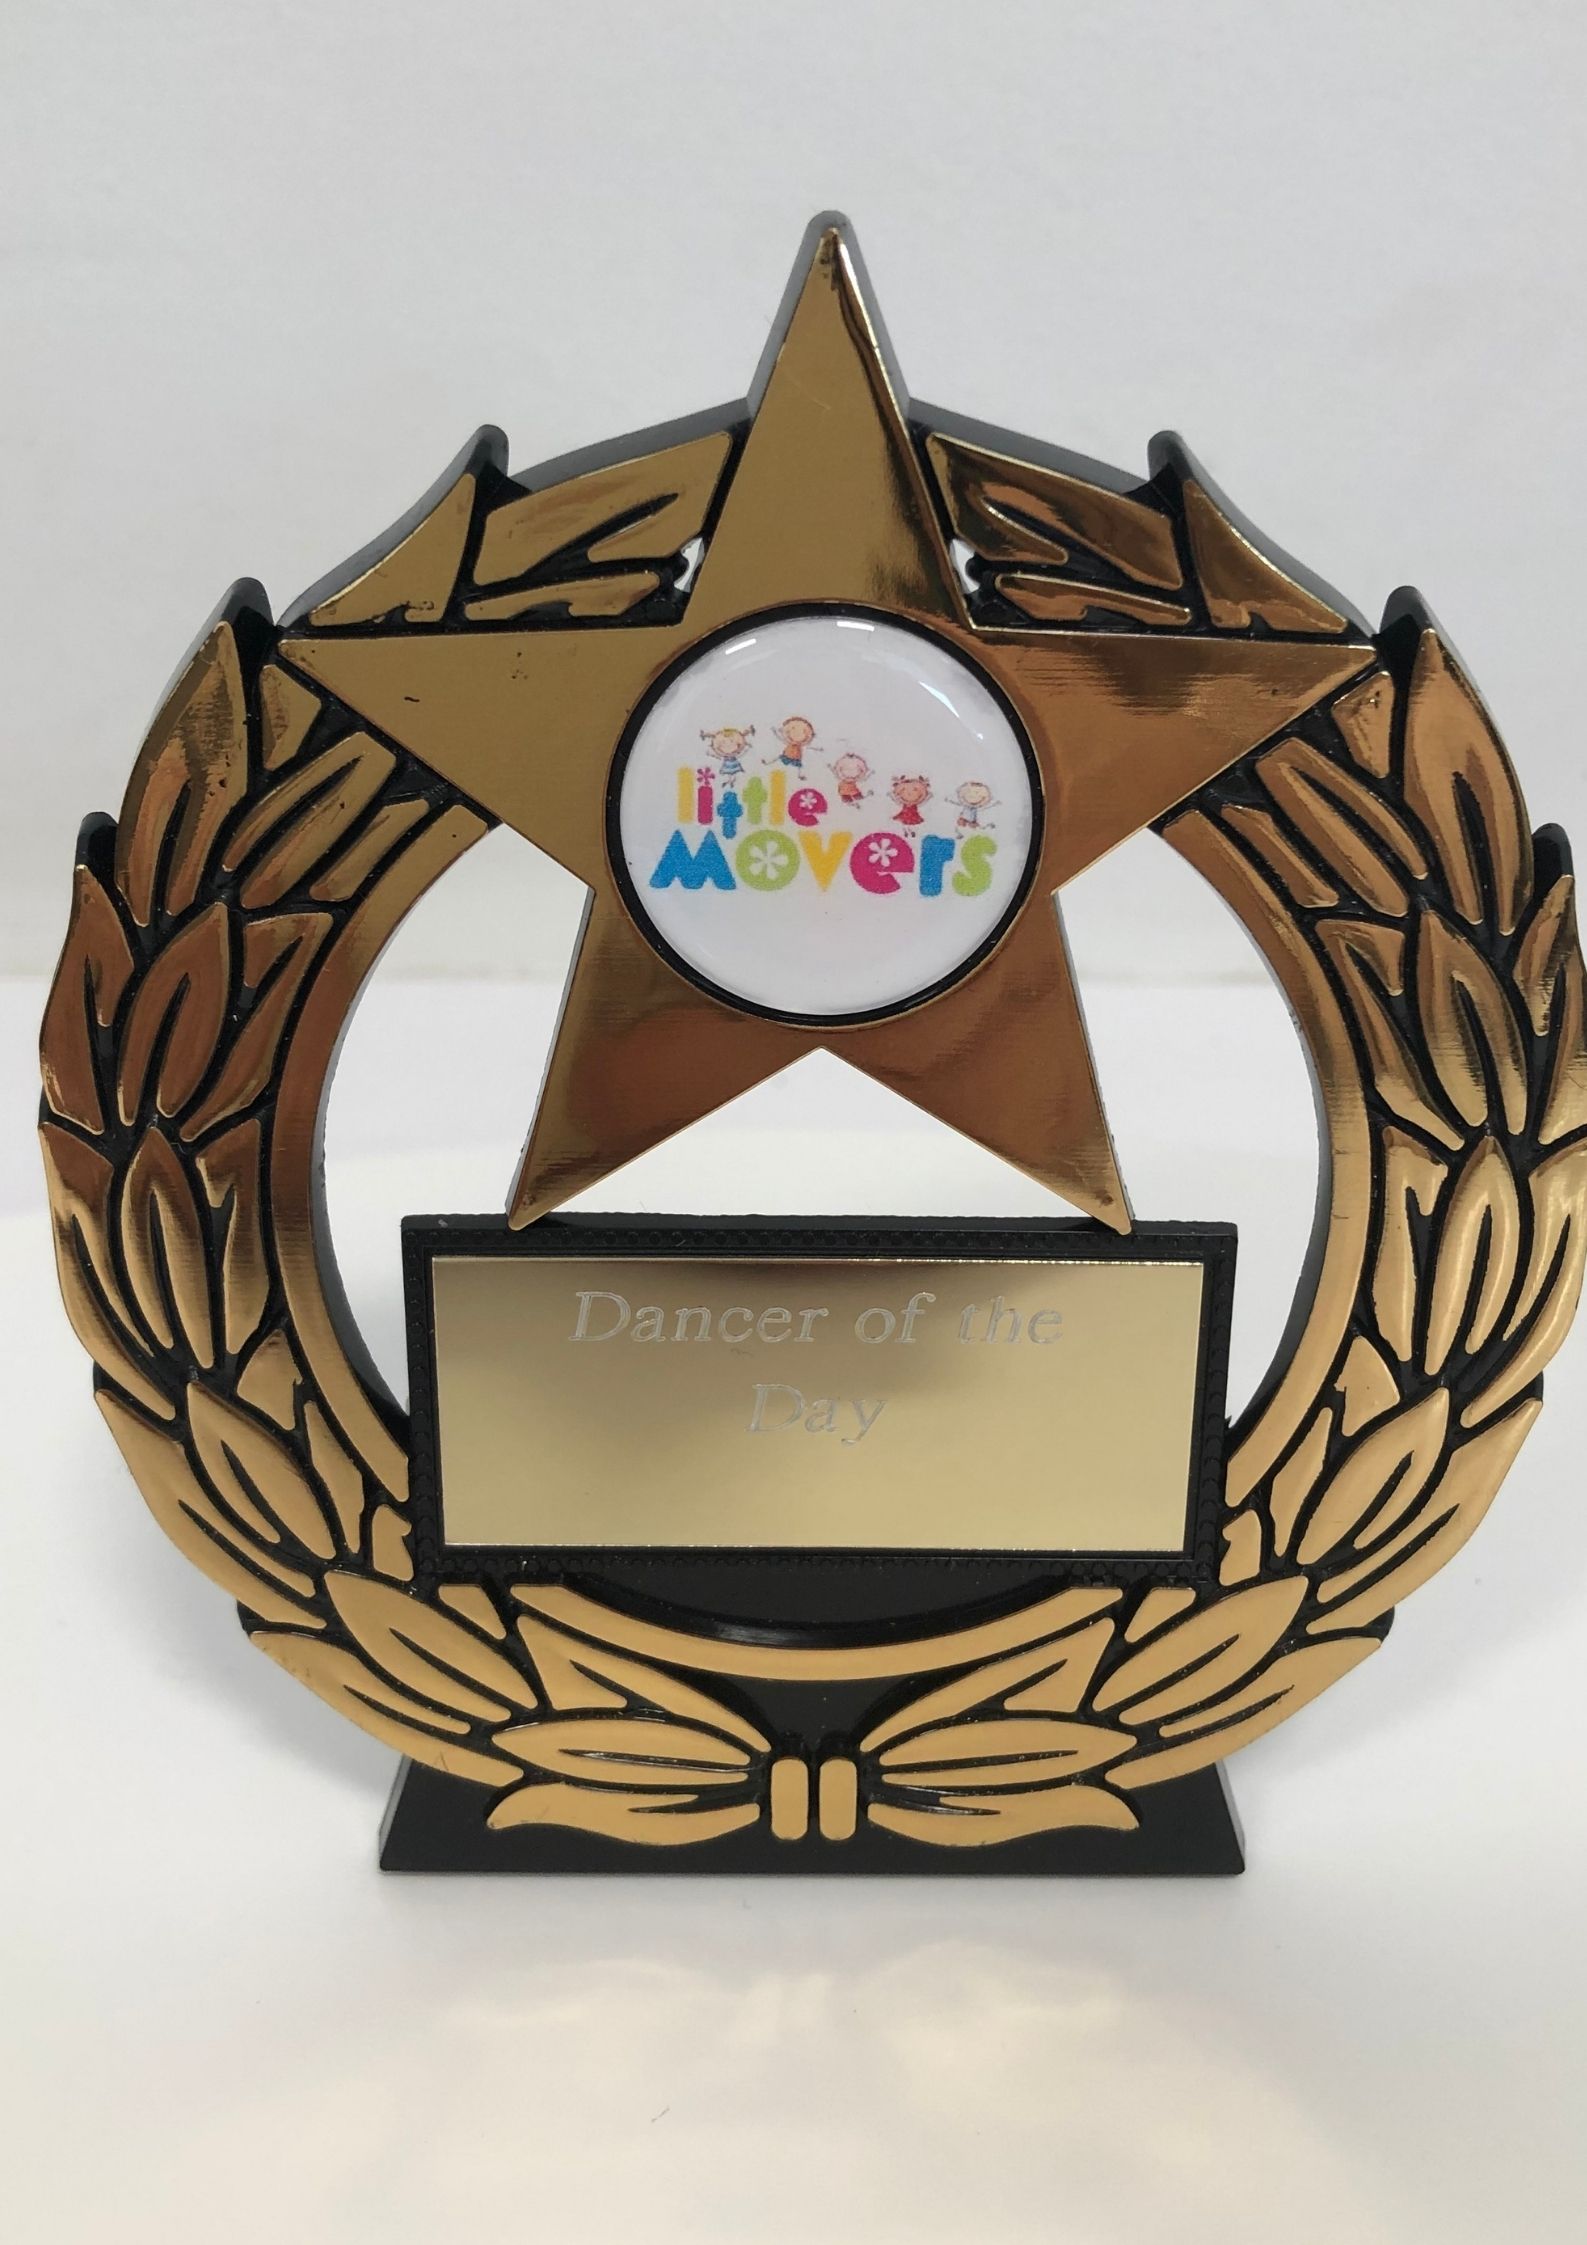 Dancer of the Day Trophy